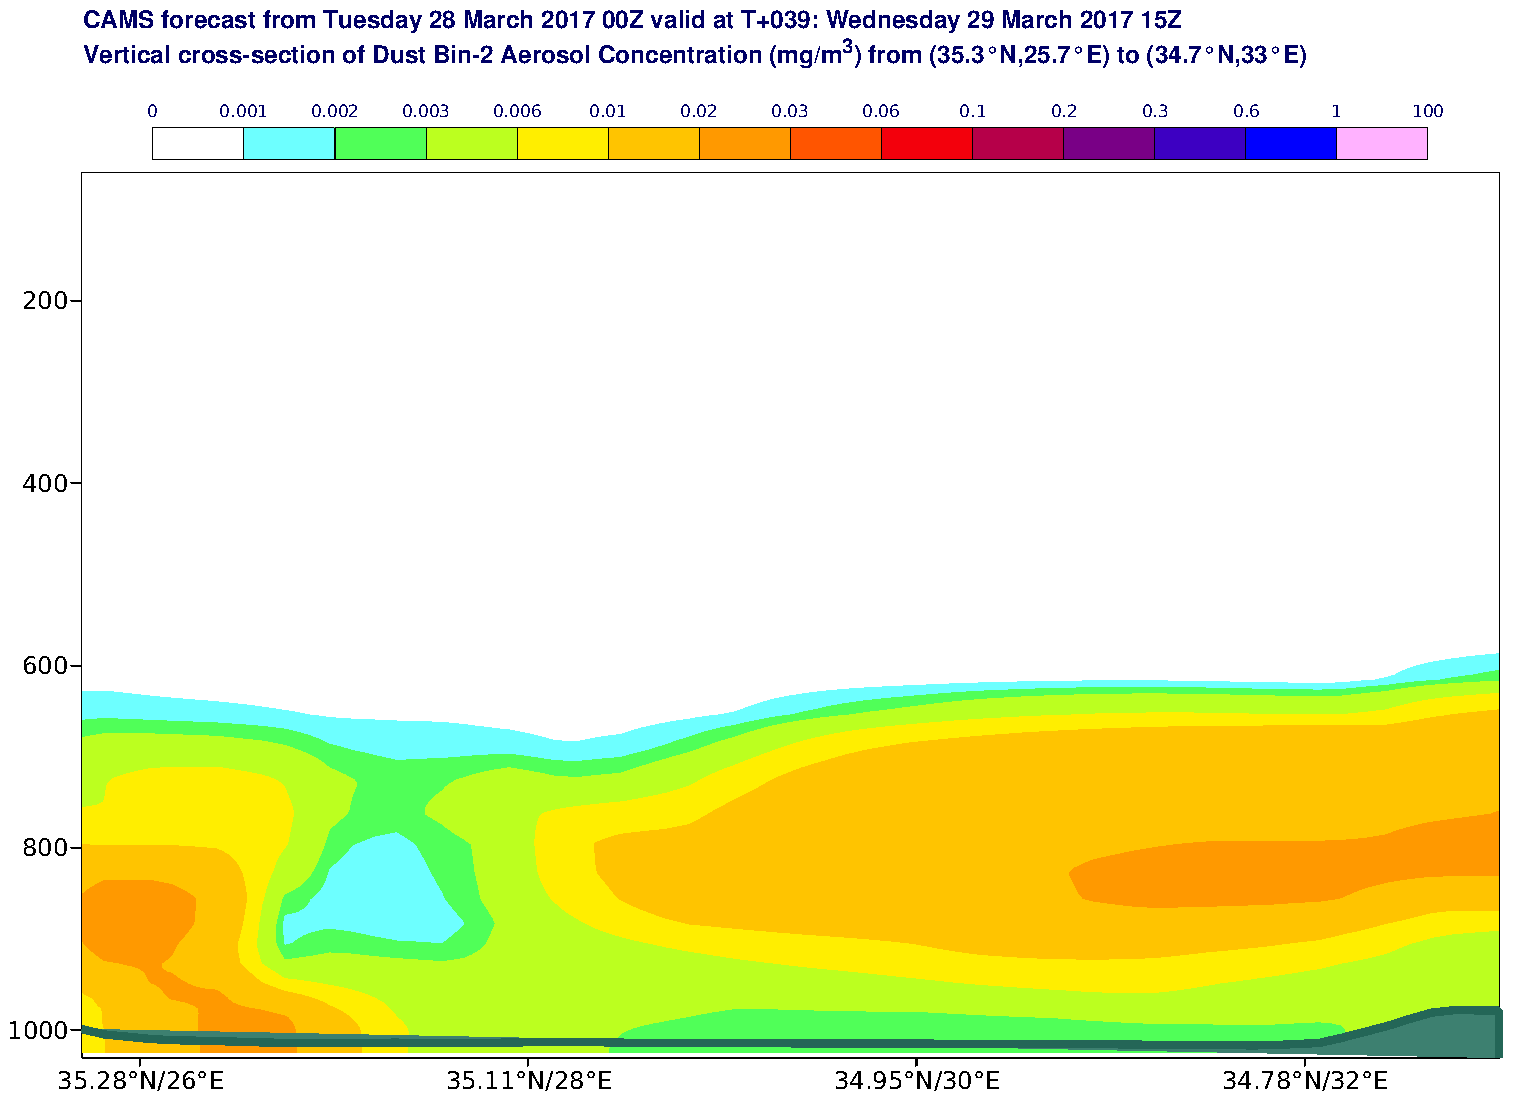 Vertical cross-section of Dust Bin-2 Aerosol Concentration (mg/m3) valid at T39 - 2017-03-29 15:00